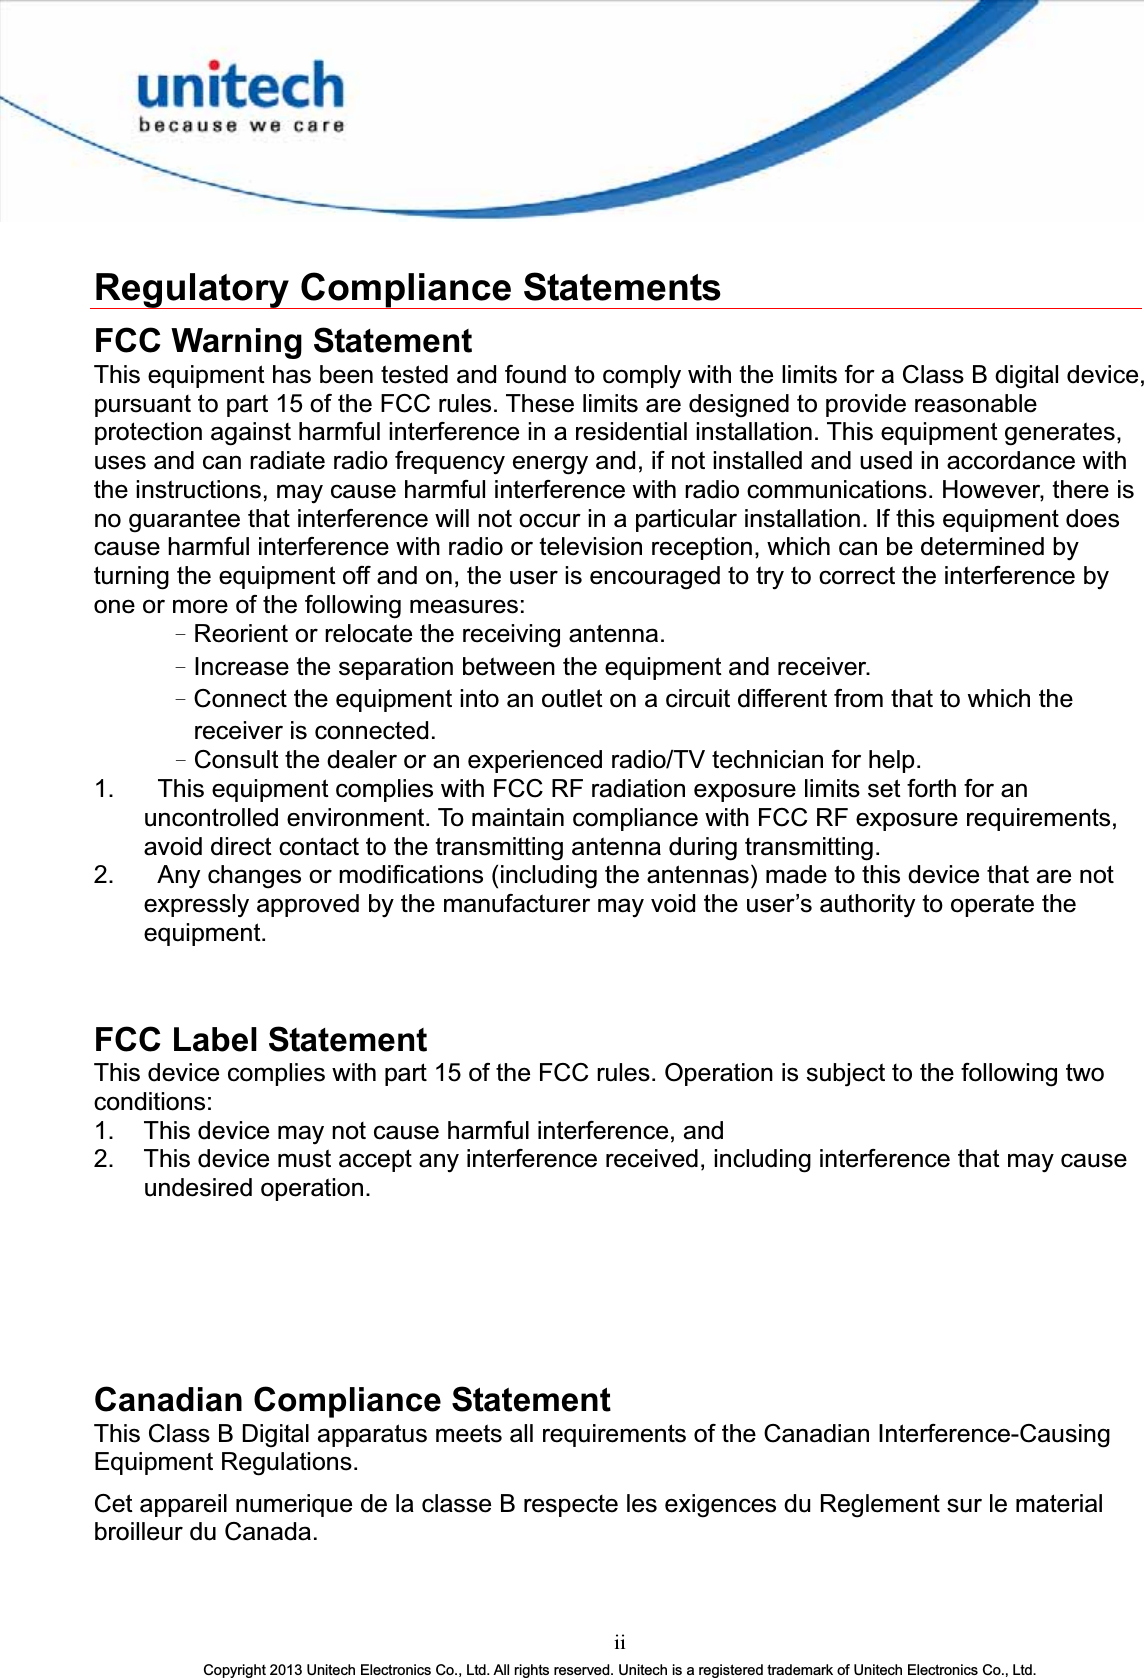 iiCopyright 2013 Unitech Electronics Co., Ltd. All rights reserved. Unitech is a registered trademark of Unitech Electronics Co., Ltd.Regulatory Compliance Statements FCC Warning Statement This equipment has been tested and found to comply with the limits for a Class B digital device, pursuant to part 15 of the FCC rules. These limits are designed to provide reasonable protection against harmful interference in a residential installation. This equipment generates, uses and can radiate radio frequency energy and, if not installed and used in accordance with the instructions, may cause harmful interference with radio communications. However, there is no guarantee that interference will not occur in a particular installation. If this equipment does cause harmful interference with radio or television reception, which can be determined by turning the equipment off and on, the user is encouraged to try to correct the interference by one or more of the following measures: ΩReorient or relocate the receiving antenna. ΩIncrease the separation between the equipment and receiver. ΩConnect the equipment into an outlet on a circuit different from that to which the receiver is connected. ΩConsult the dealer or an experienced radio/TV technician for help. 1.  This equipment complies with FCC RF radiation exposure limits set forth for an uncontrolled environment. To maintain compliance with FCC RF exposure requirements, avoid direct contact to the transmitting antenna during transmitting. 2.  Any changes or modifications (including the antennas) made to this device that are not expressly approved by the manufacturer may void the user’s authority to operate the equipment.FCC Label Statement This device complies with part 15 of the FCC rules. Operation is subject to the following two conditions: 1.  This device may not cause harmful interference, and 2.  This device must accept any interference received, including interference that may cause undesired operation. Canadian Compliance Statement This Class B Digital apparatus meets all requirements of the Canadian Interference-Causing Equipment Regulations. Cet appareil numerique de la classe B respecte les exigences du Reglement sur le material broilleur du Canada. 